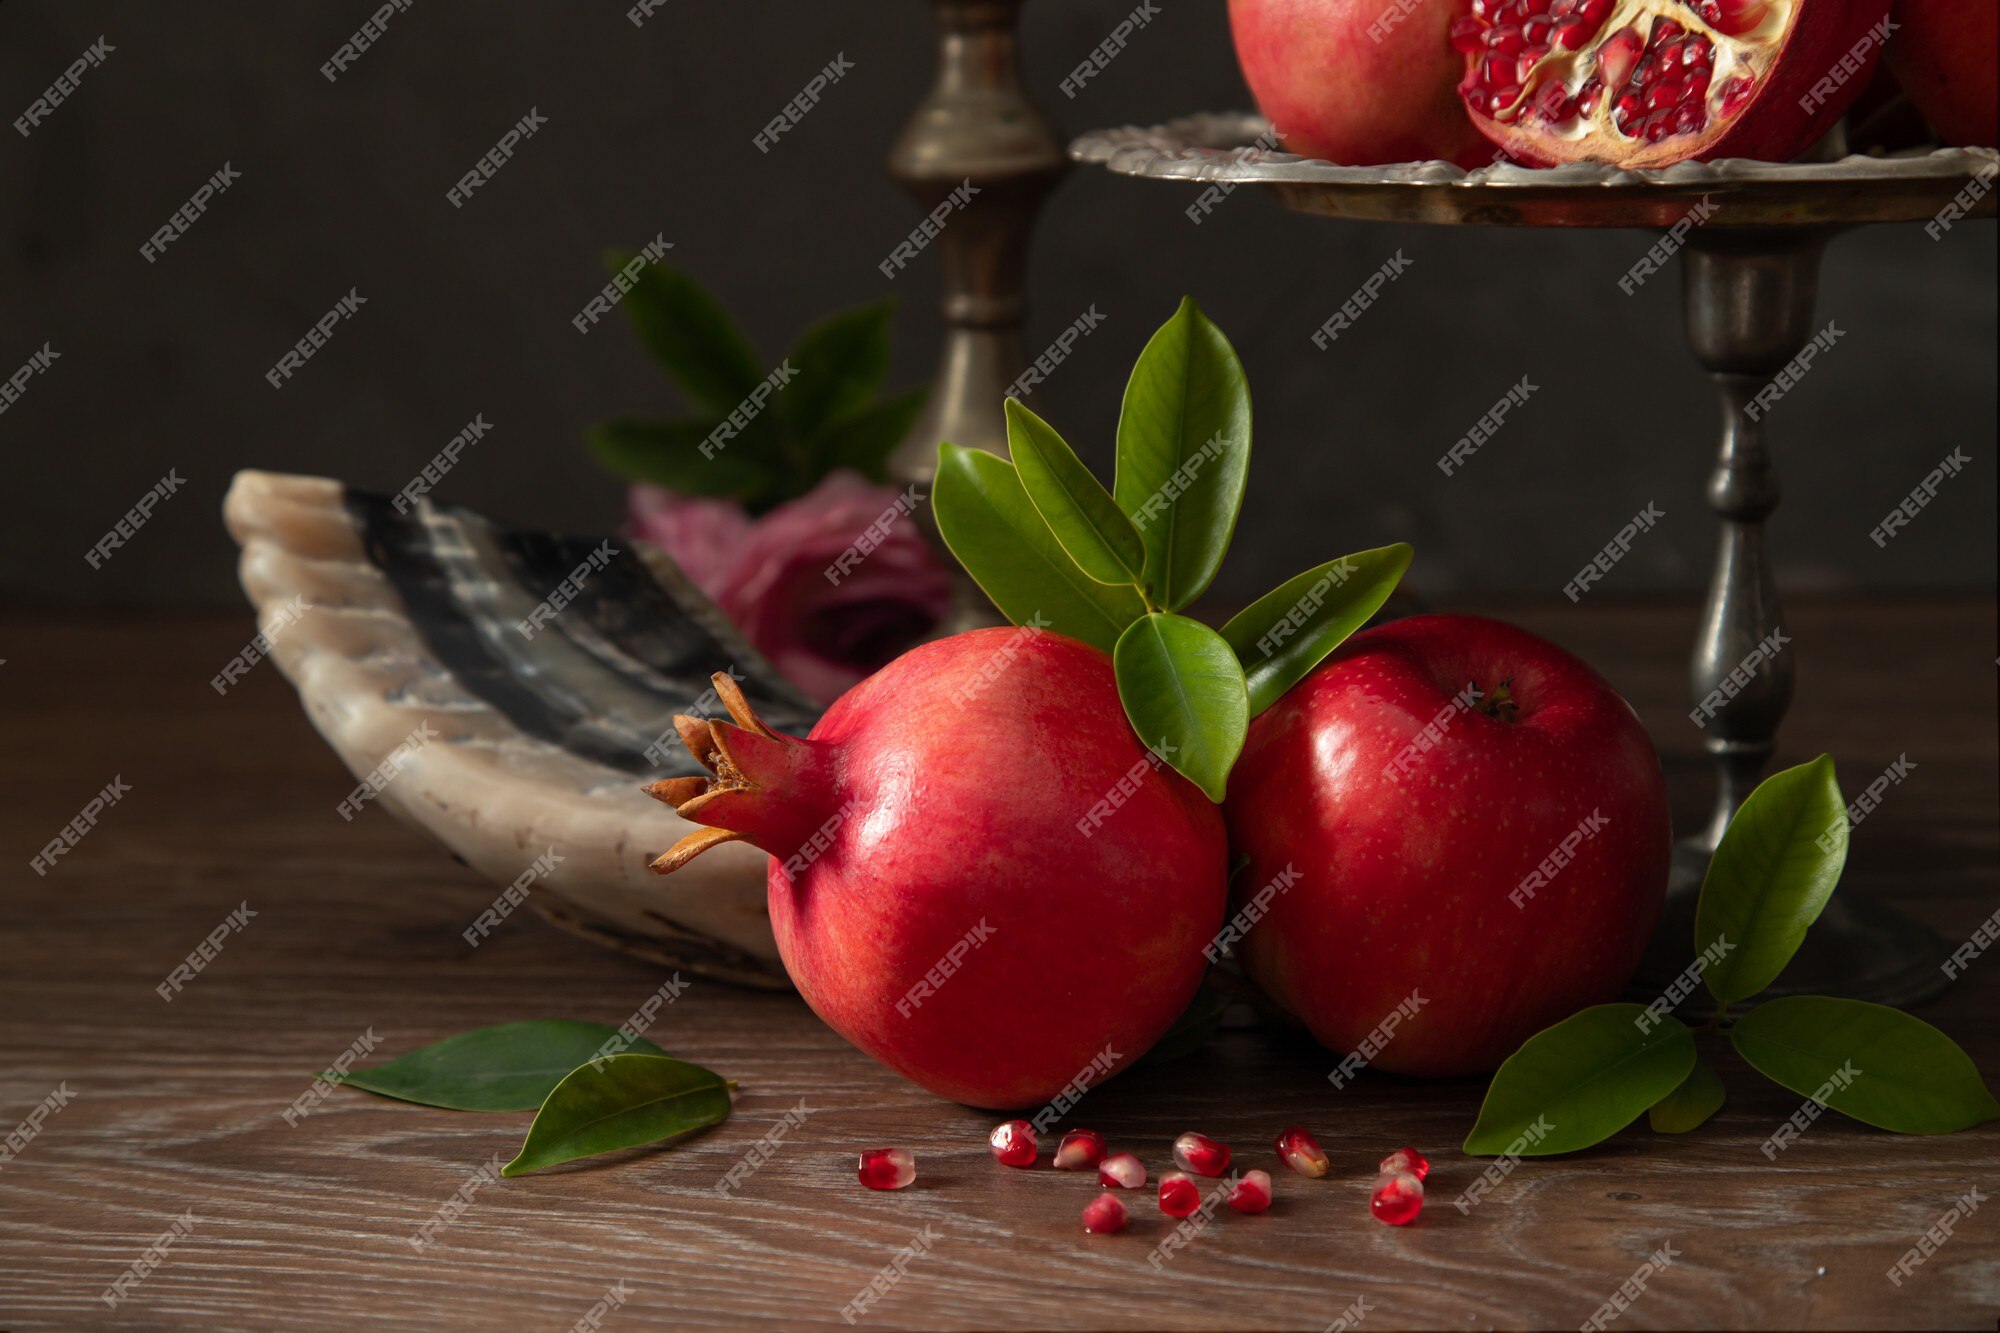 Premium Photo | Red apples, shofar (horn) and pomegranates on a wooden  table, the concept of the jewish new year - rosh hashanah.